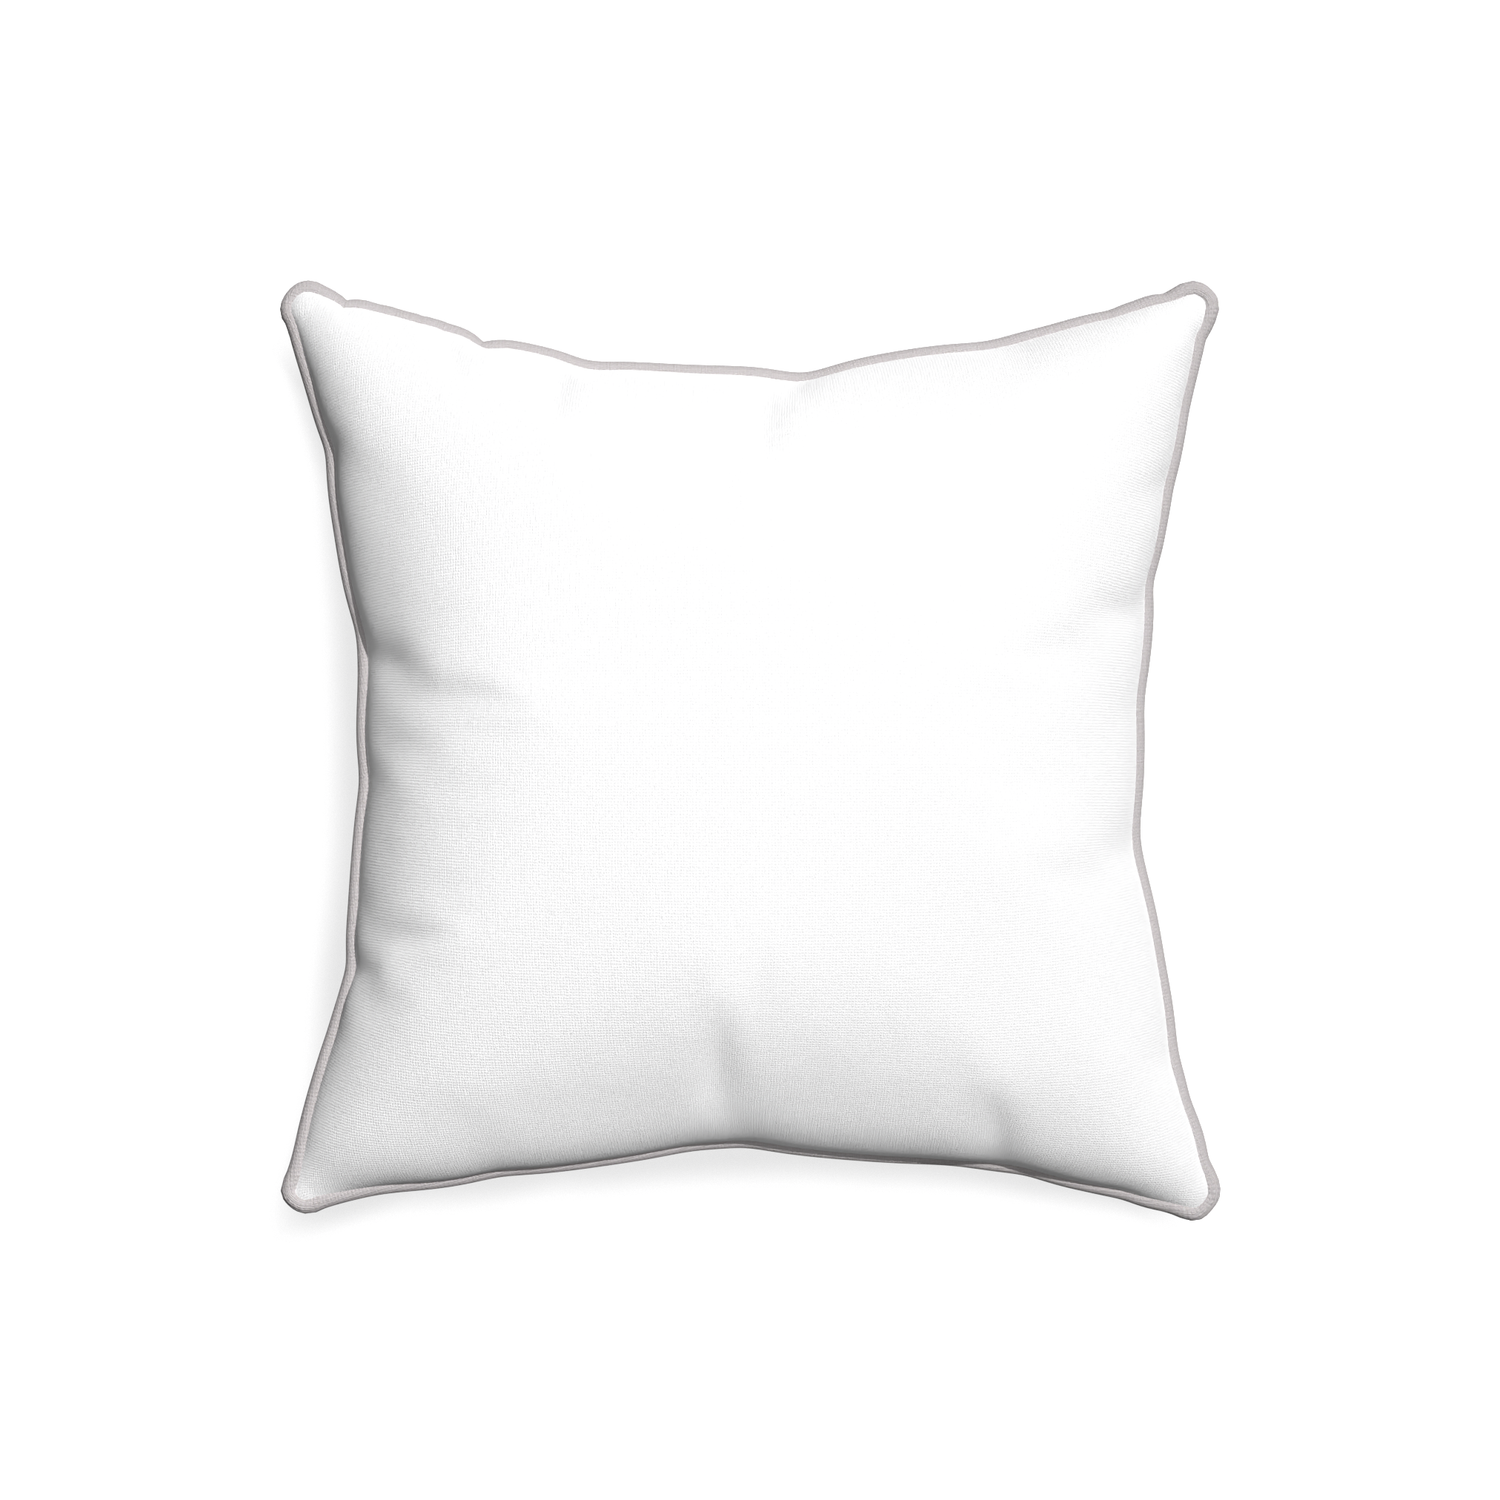 20-square snow custom white cottonpillow with pebble piping on white background